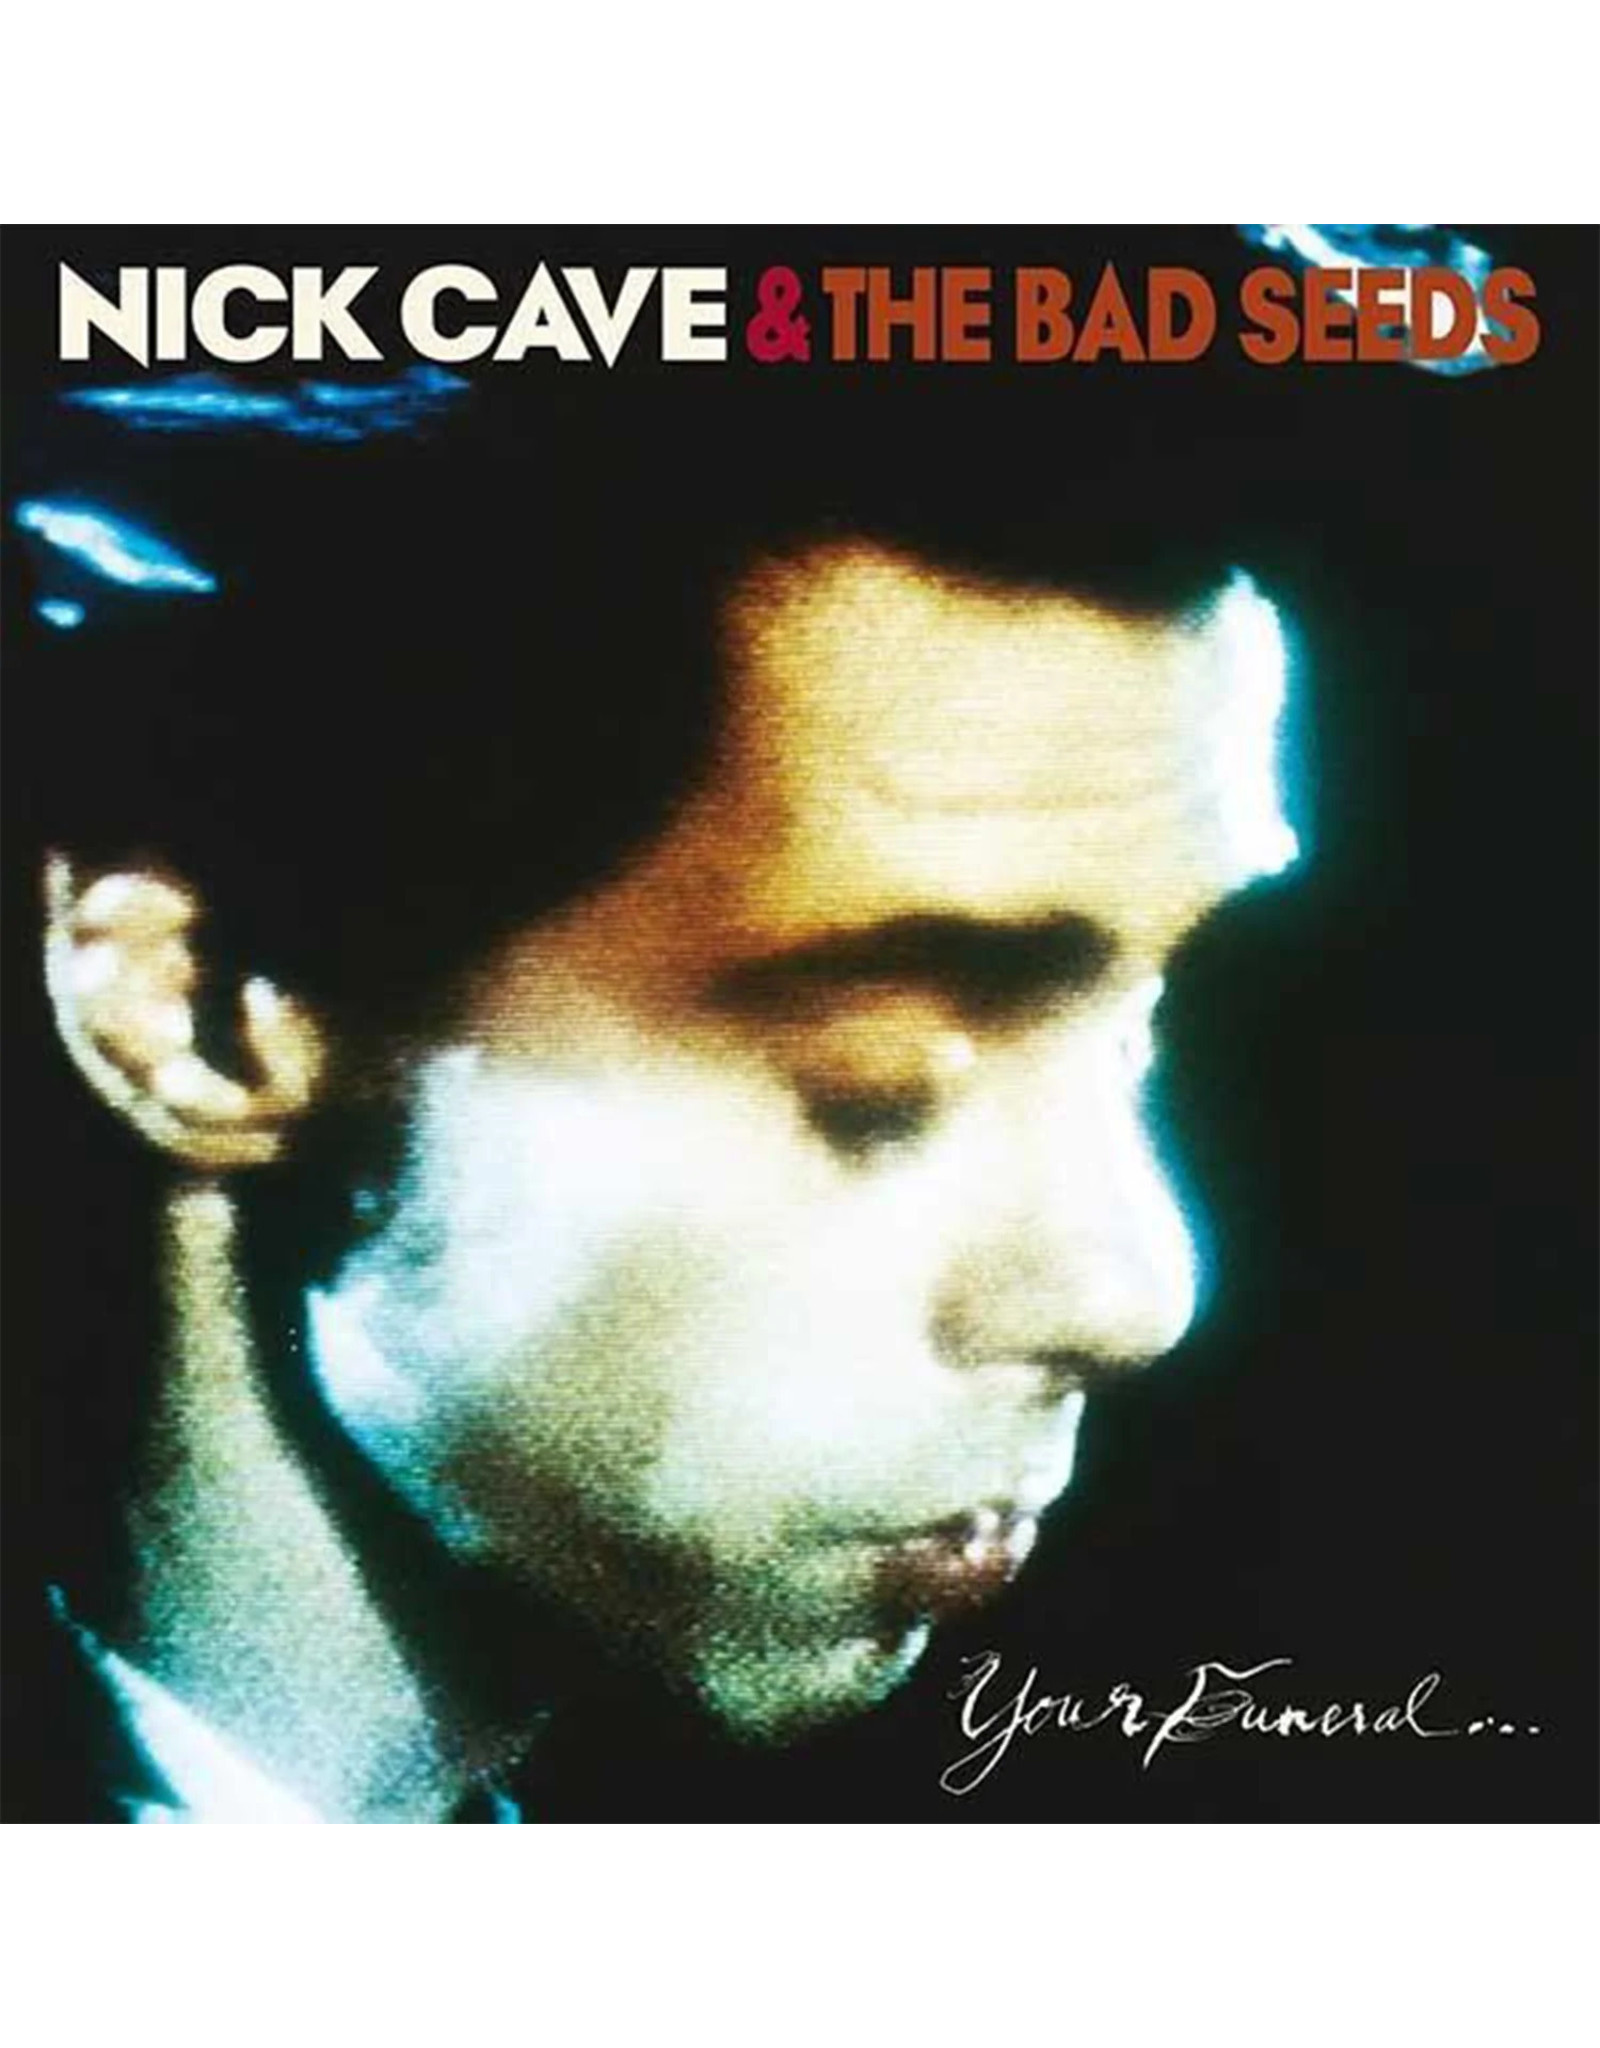 Listen　Records　Funeral...　Nick　Trial　Seeds:　My　the　Your　Bad　Cave,　LP